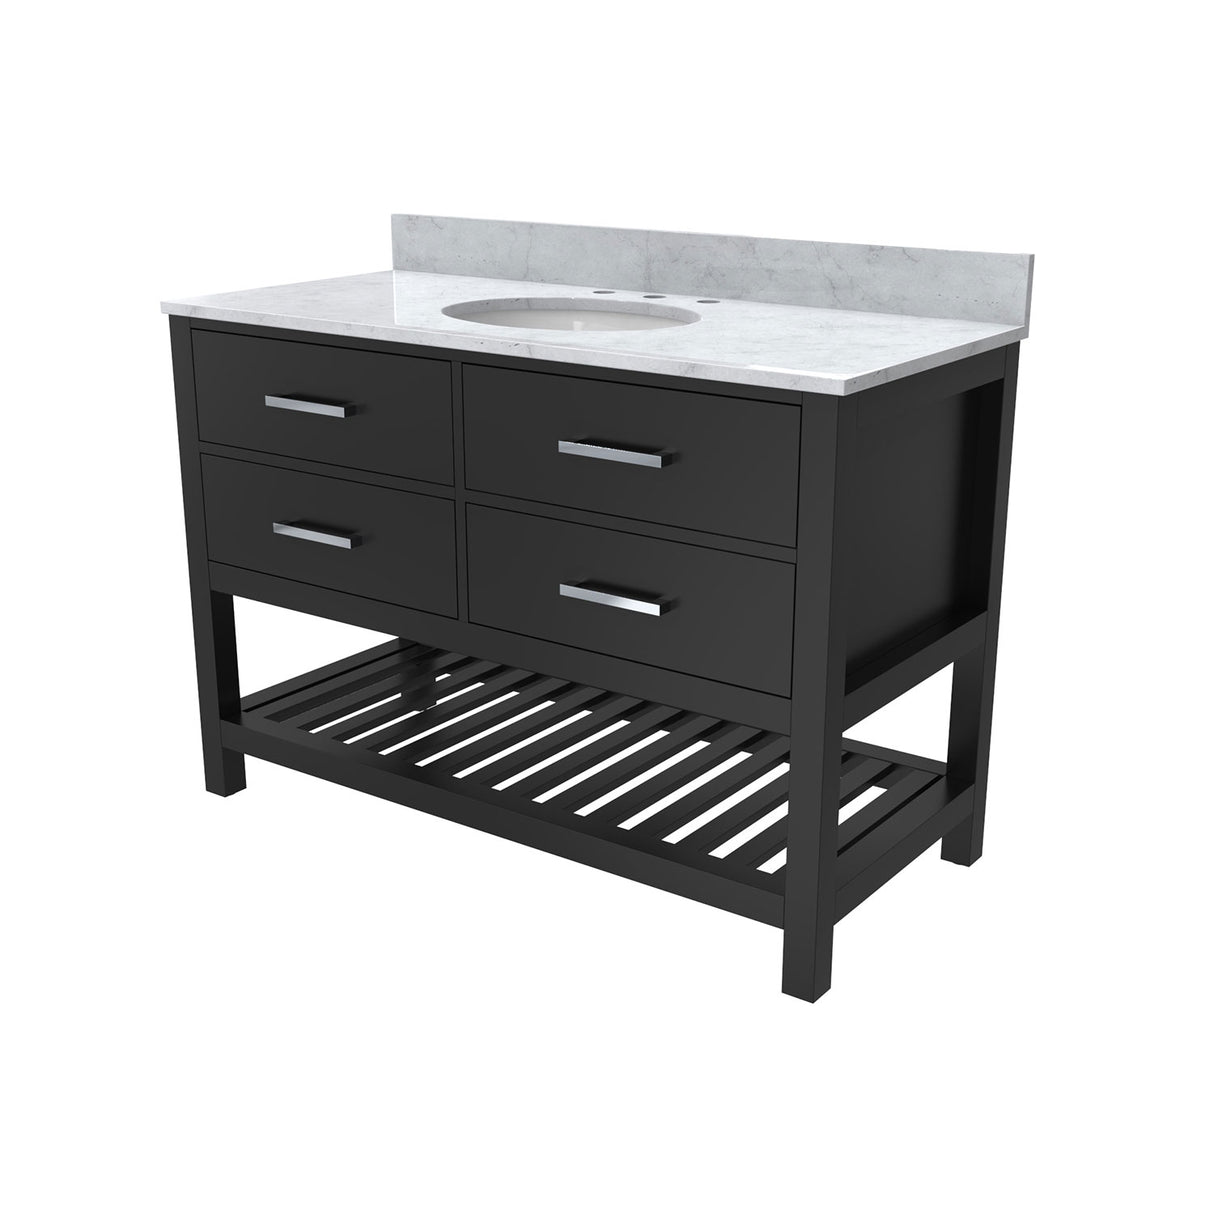 Valencia 48 Inch Oak Console Vanity with Oval Undermount Sink - Black